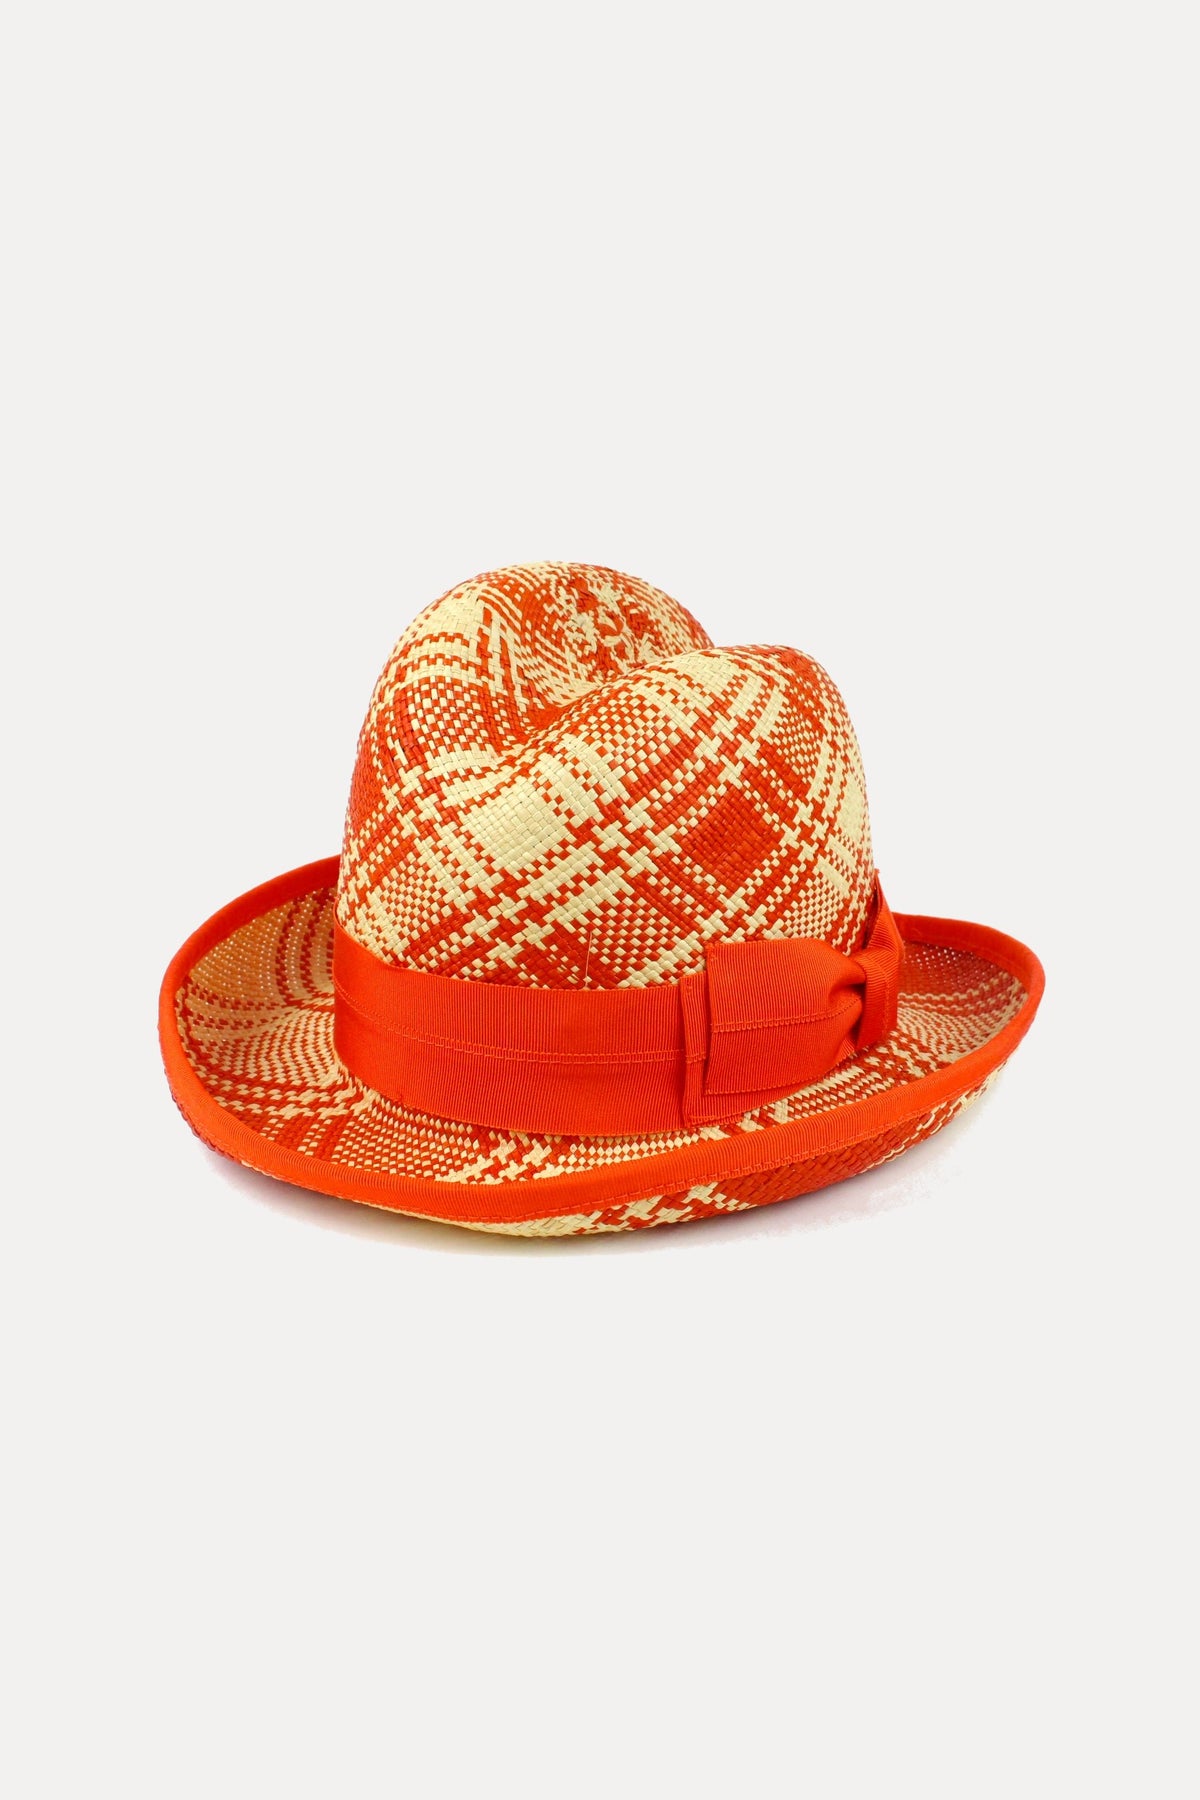 PANAMA FLASH TIPPER - SEVILLE TWIST-hats-A Child Of The Jago